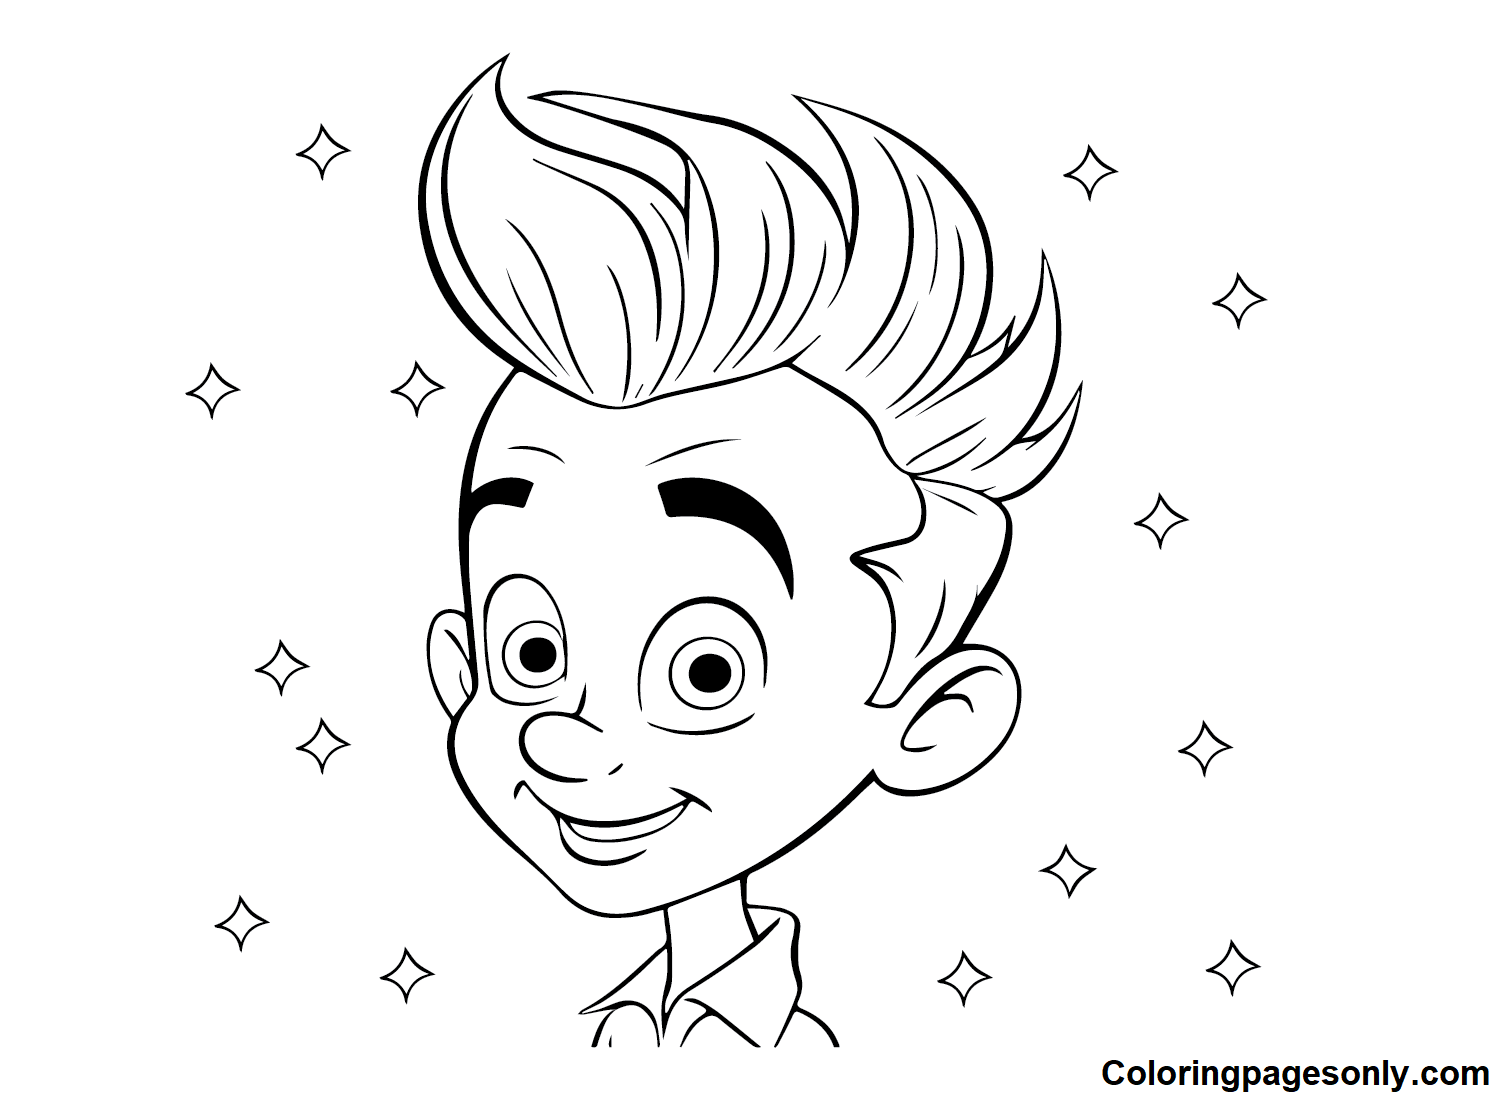 Printable Jimmy Neutron Coloring Pages